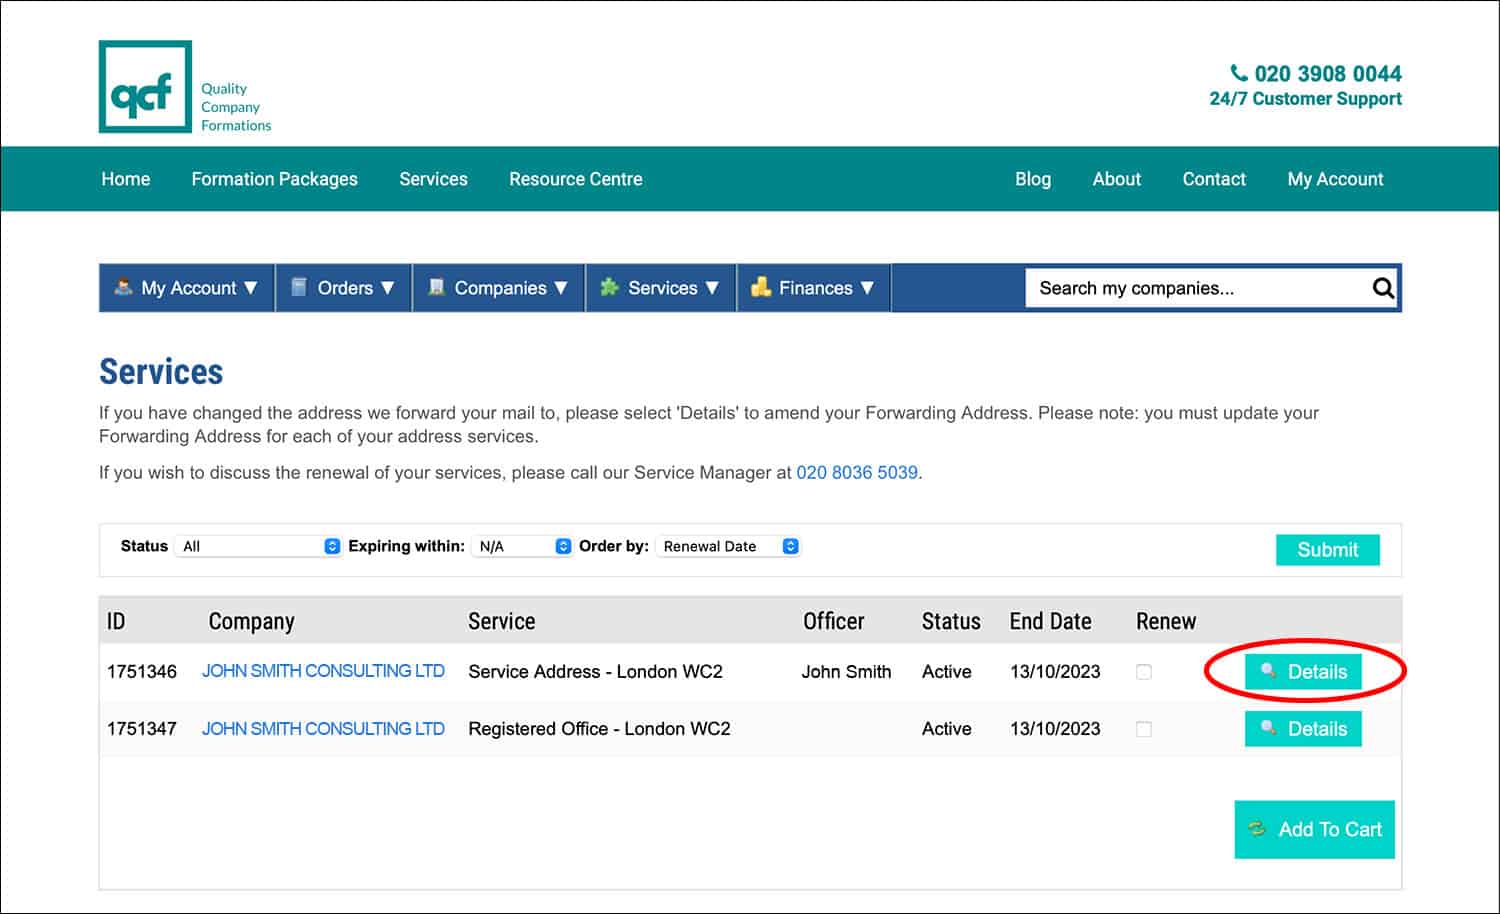 Screenshot of the QCF Client Portal 'Services' page